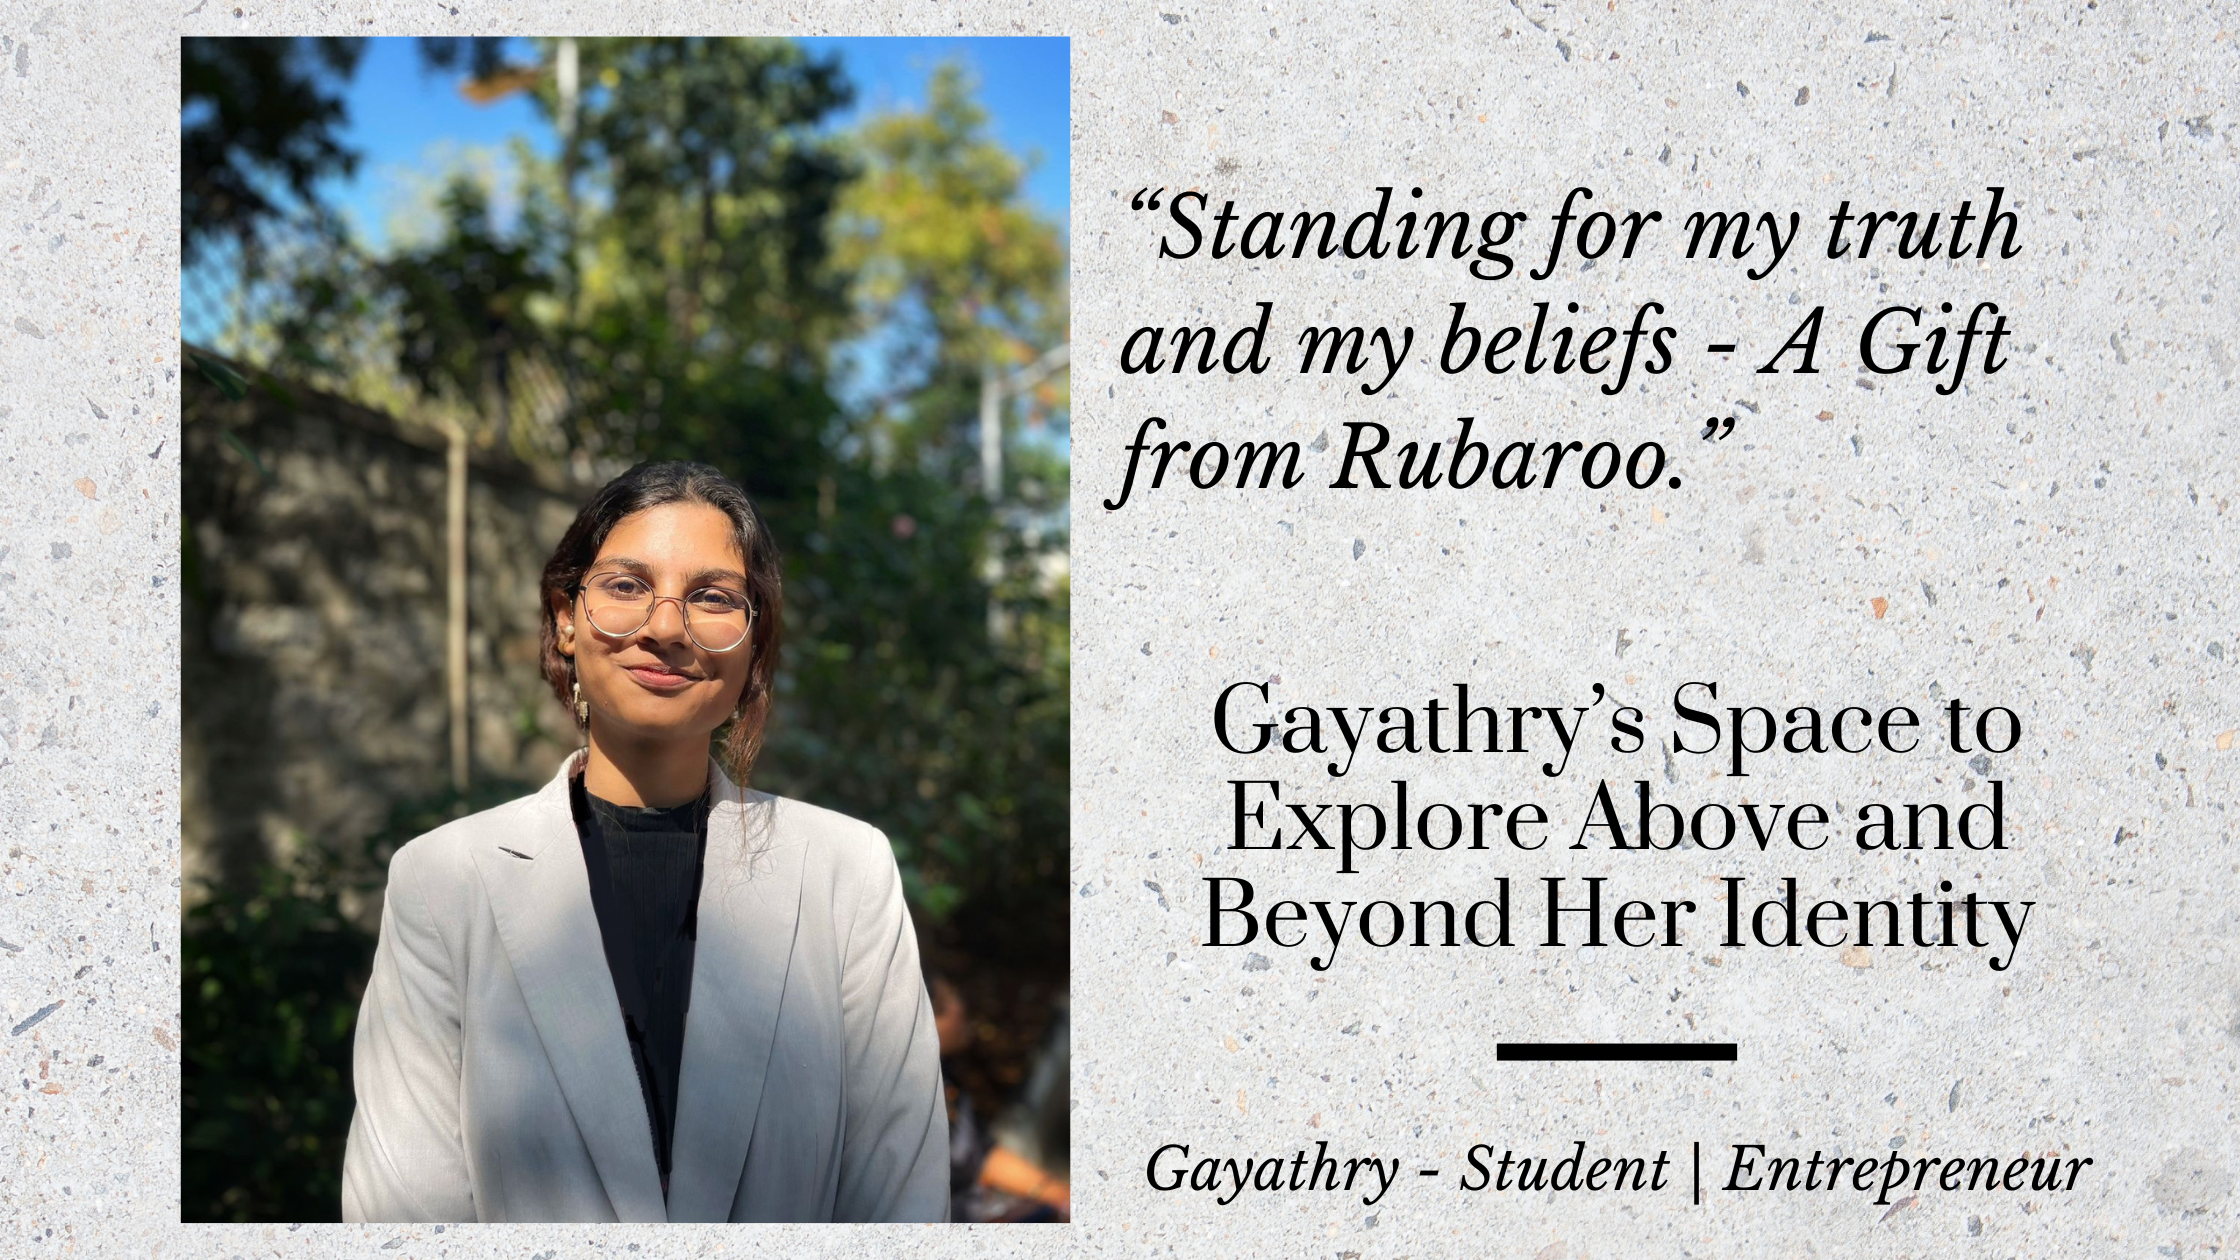 Gayathry’s Space to Explore Above and Beyond Her Identity